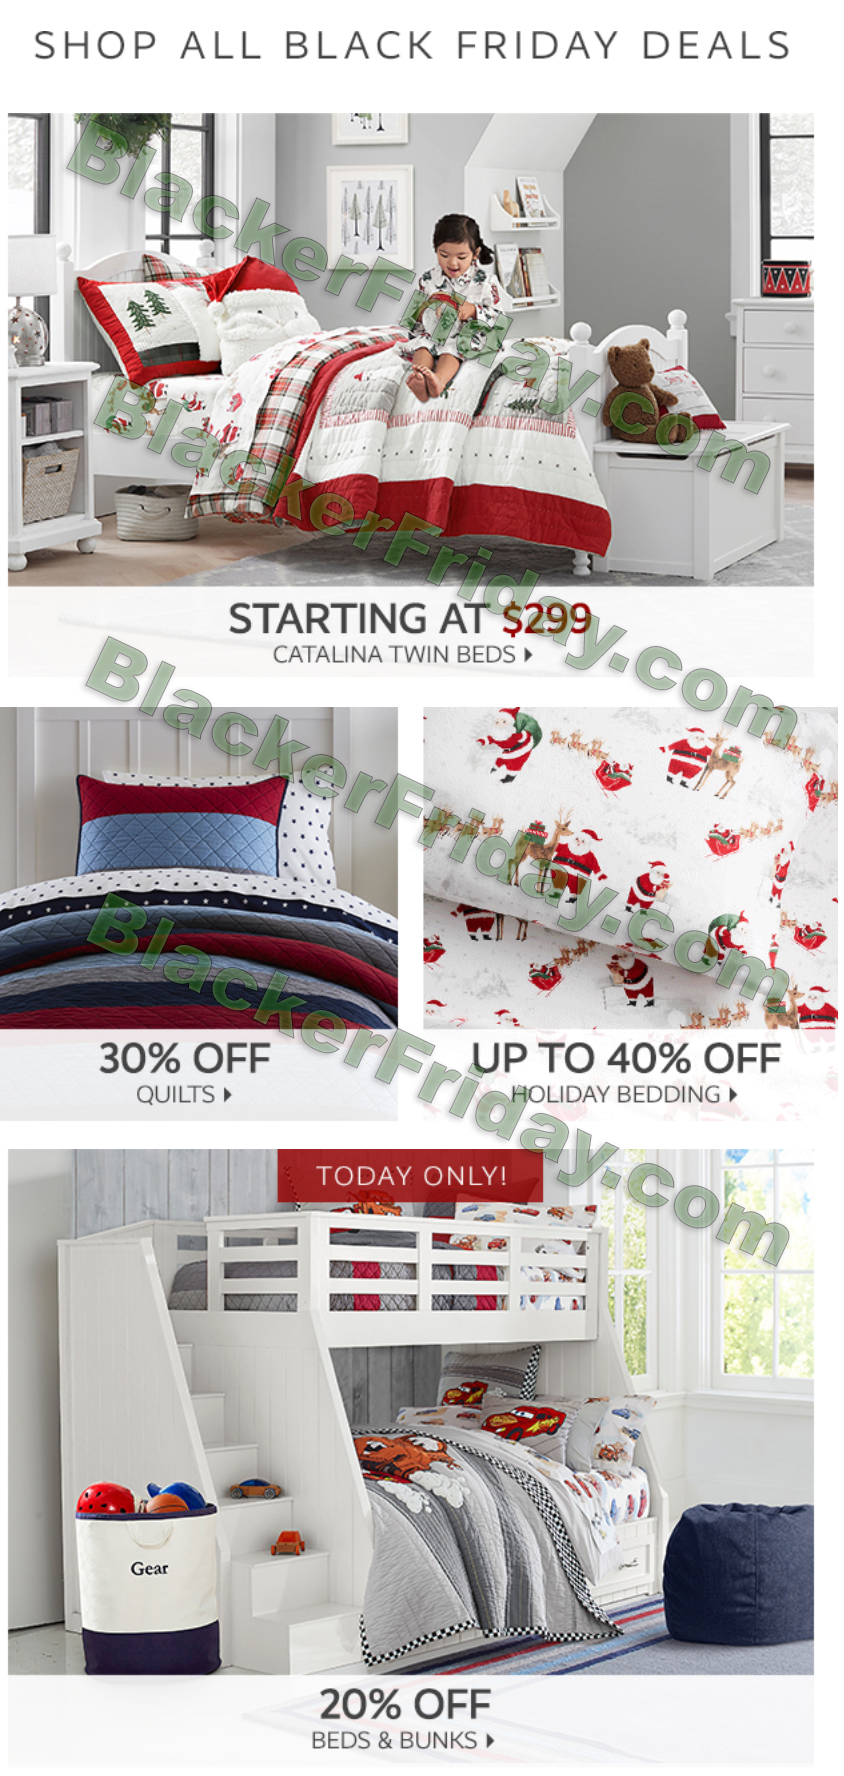 Pottery Barn Kids Black Friday 2021 Sale What to Expect Blacker Friday